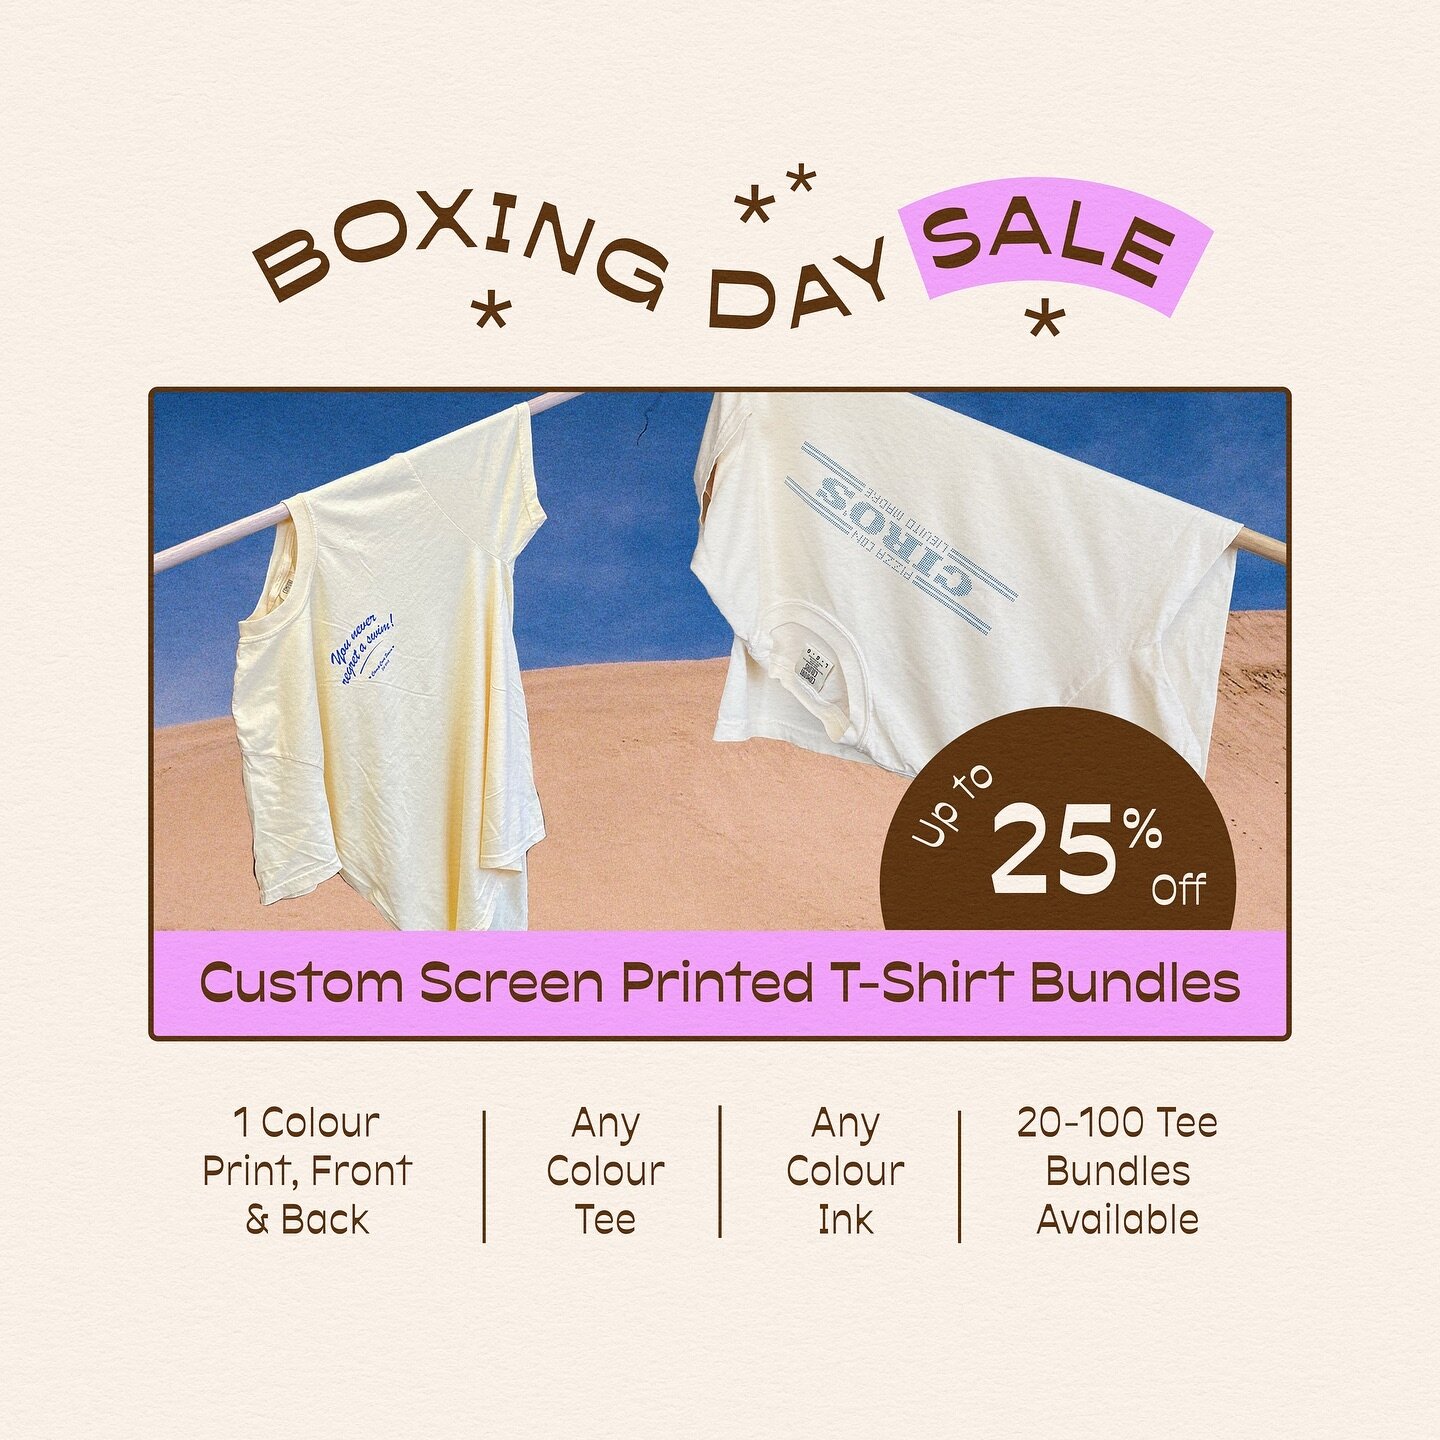 Our Boxing Day Sale is live! 

We want to make custom screen printing on quality garments affordable and super easy to order - so we&rsquo;re doing things a little differently this year!

Purchase a print bundle on our website and you&rsquo;ll jump s